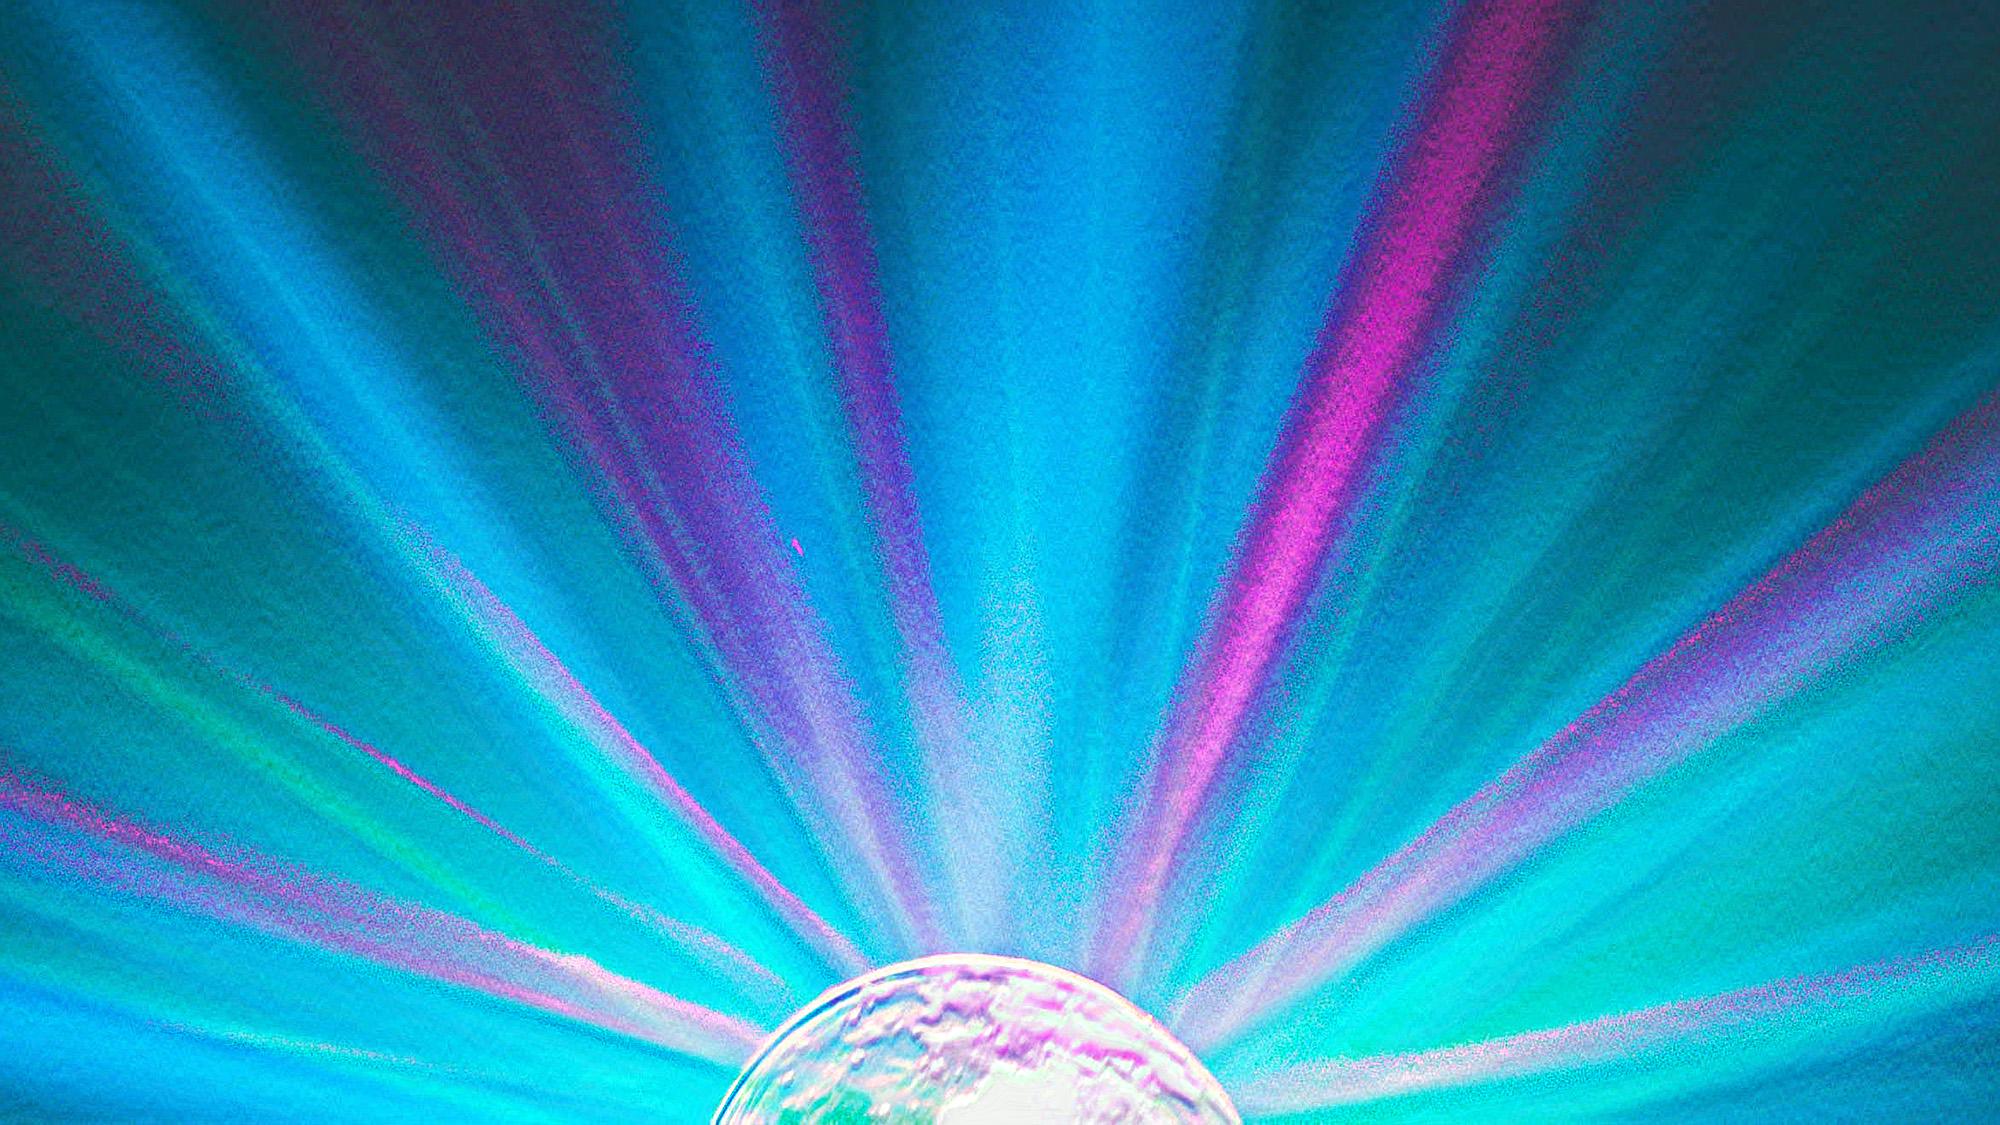 artistic rendering of pink, green and blue light rays spreading out from a round light source